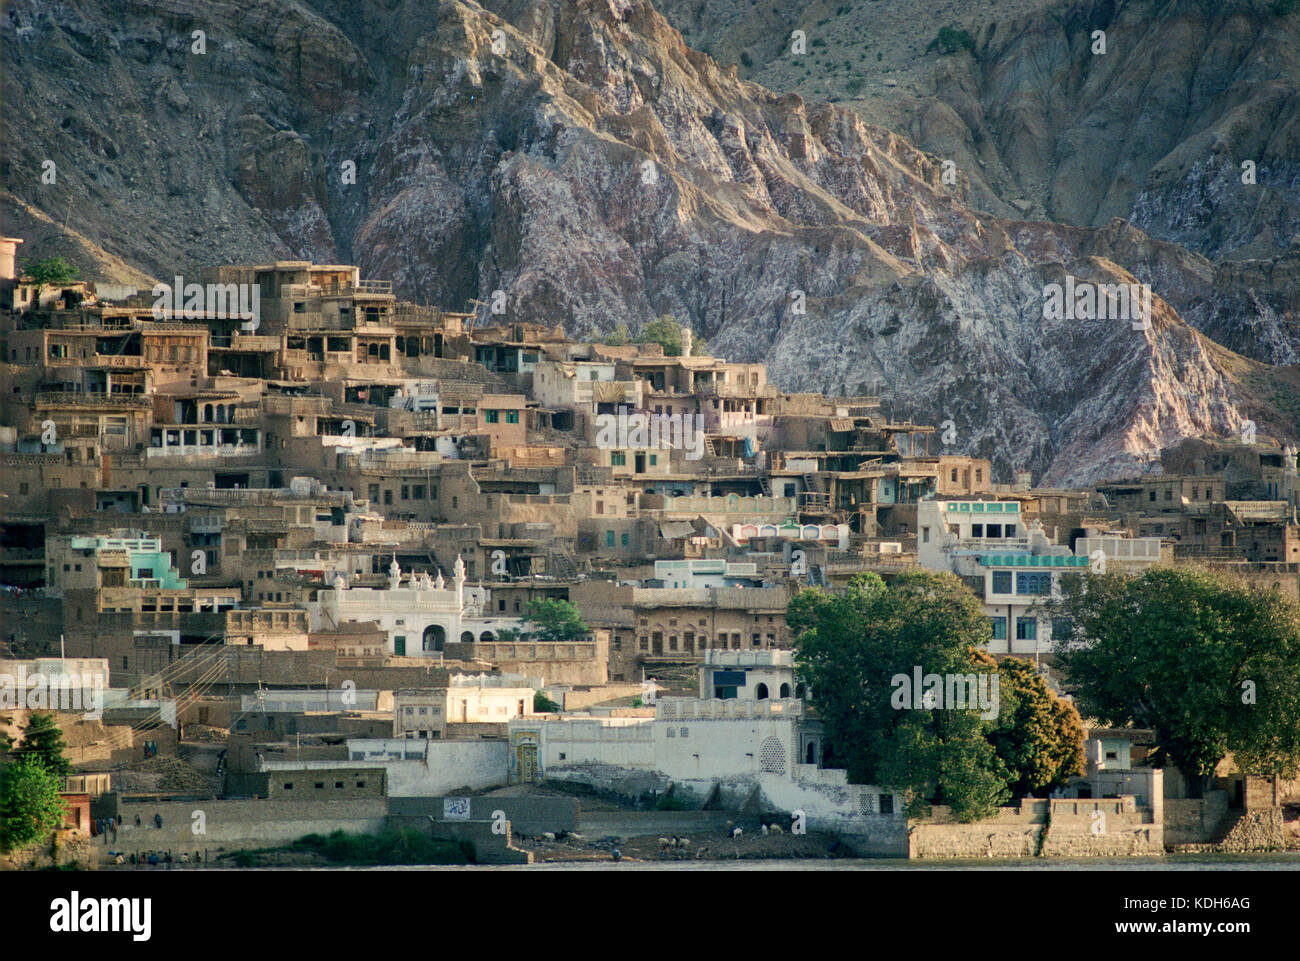 Village buildings nestle into the steep walls of the Indus river valley near Kalabagh, Punjab, Pakistan. Stock Photo